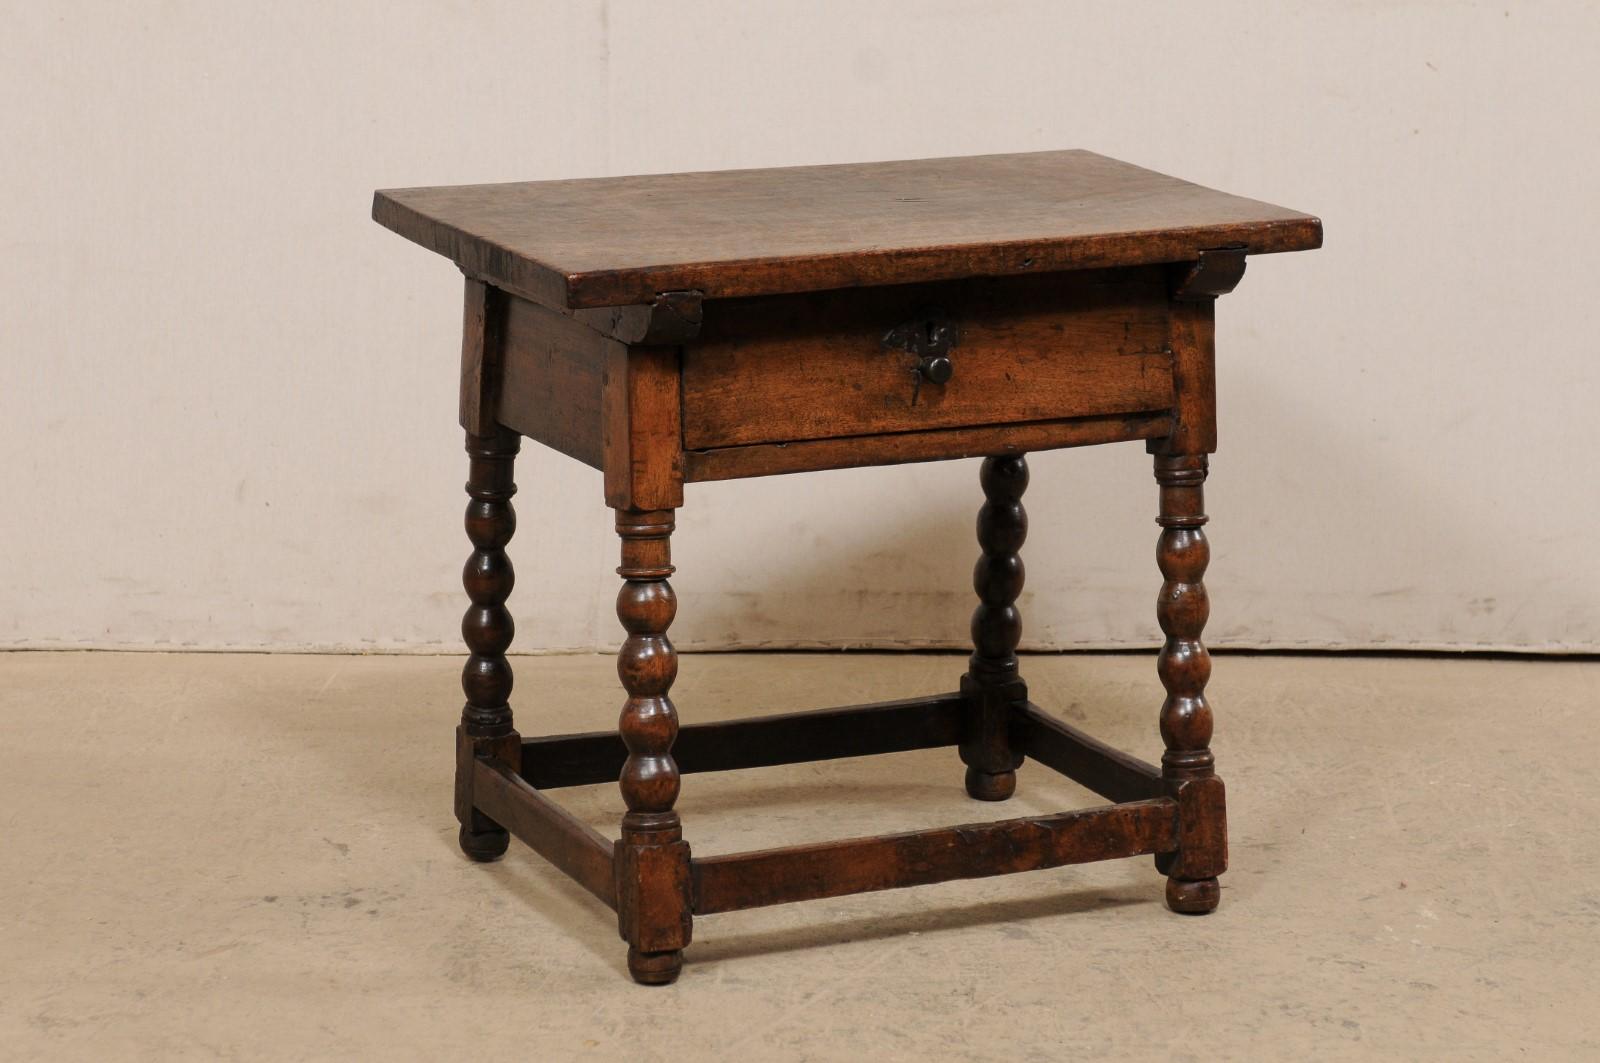 An Italian occasional table with single drawer, from the 18th century. This antique table from Italy has a rectangular-shaped top, which overhangs the apron below which houses a single drawer at one side. The table is raised on four ball-turned and